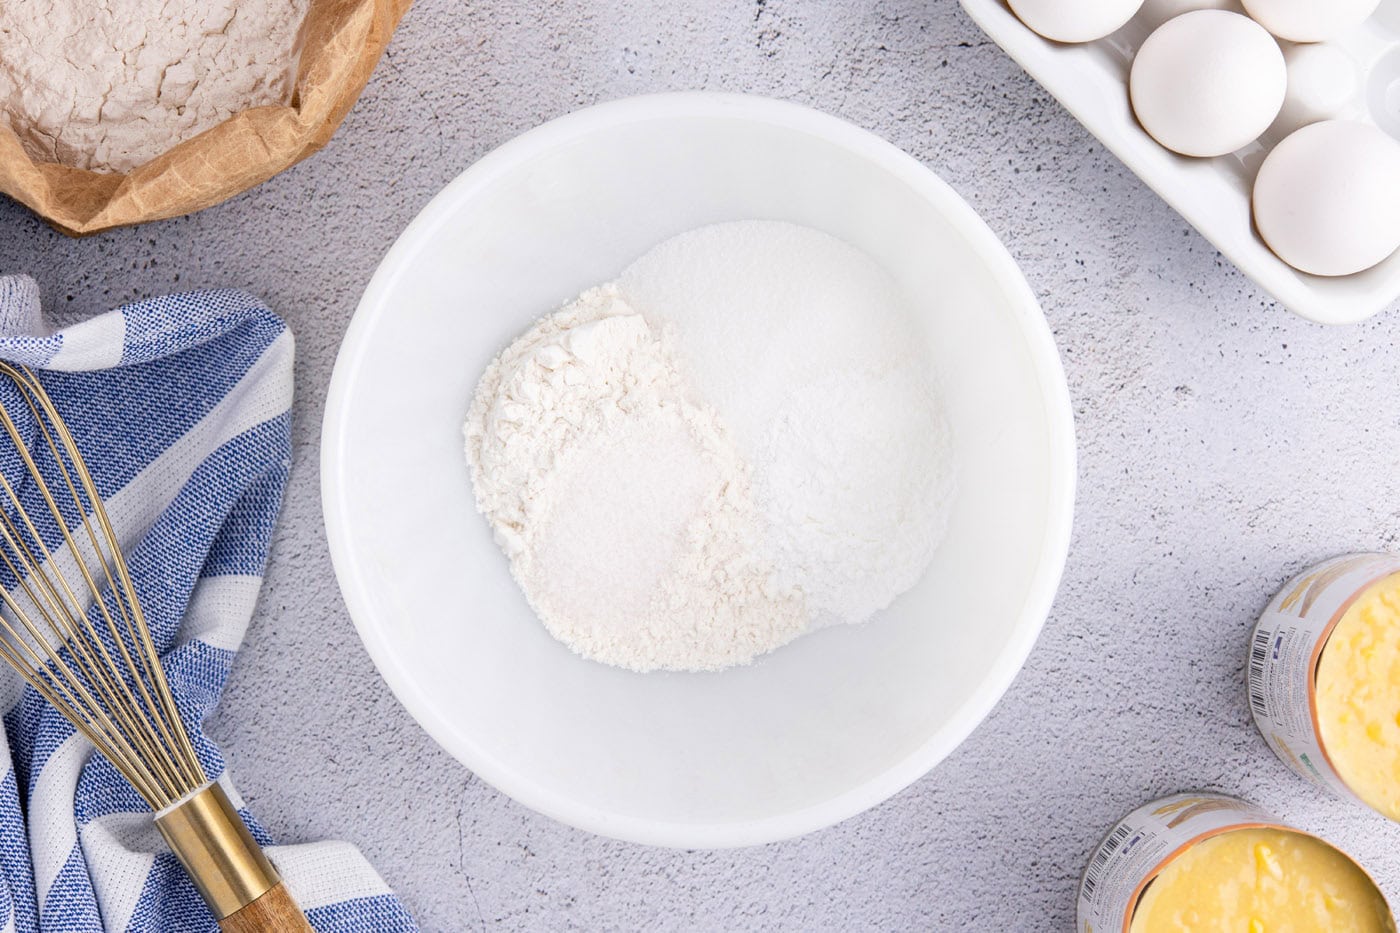 all-purpose flour, granulated sugar, baking powder, and salt in a mixing bowl